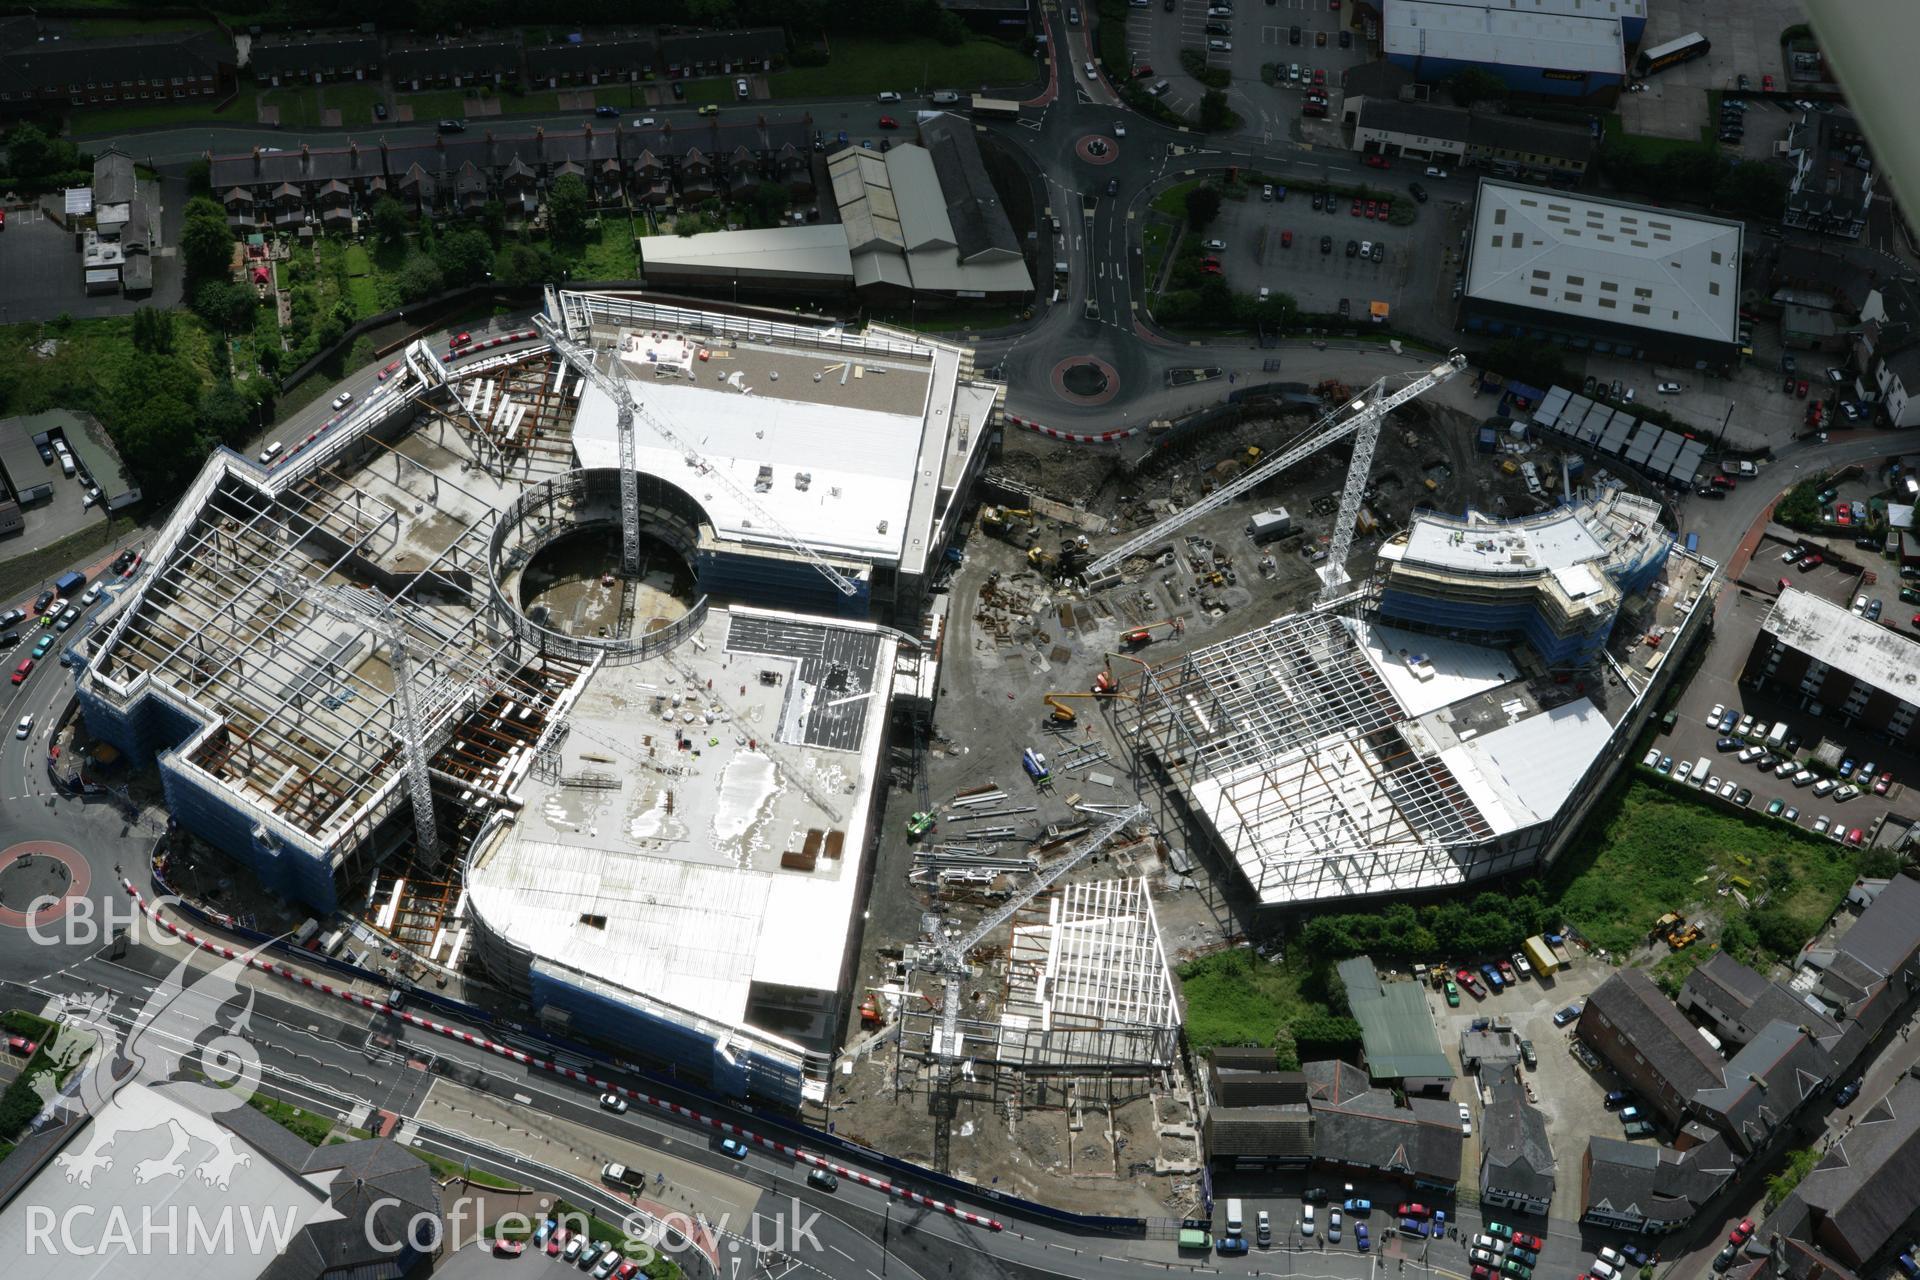 RCAHMW colour oblique aerial photograph of Wrexham, showing construction of a new shopping centre. Taken on 24 July 2007 by Toby Driver